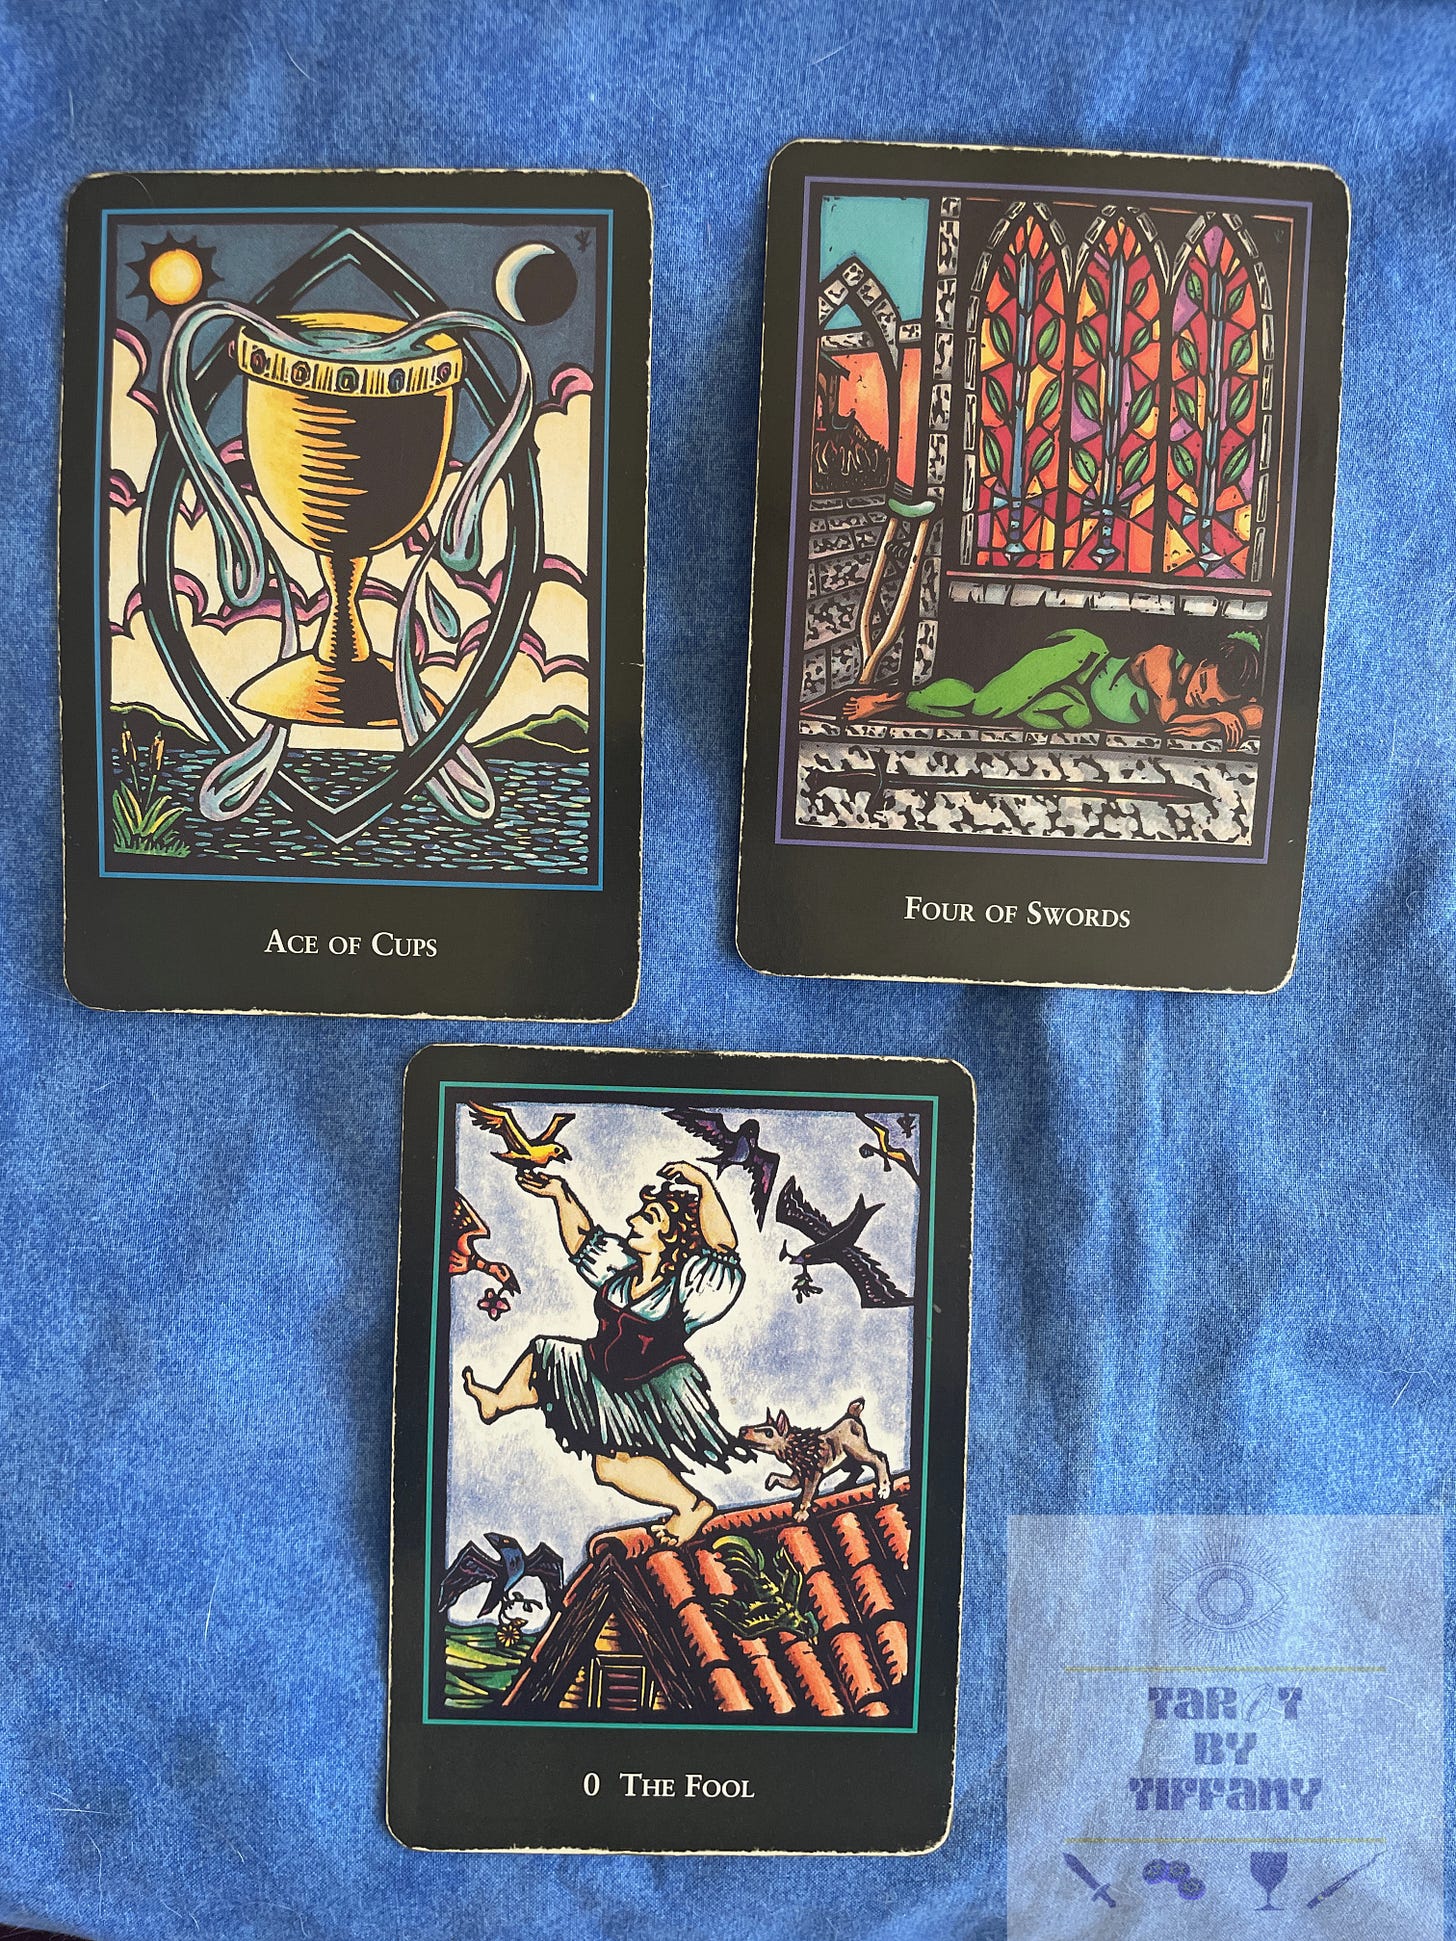 3-card spread using the World Spirit Tarot by Lauren O'Leary. The three cards are against a blue cloth background. Top two cards (left to right): Ace of Cups and 4 of Swords. Bottom card: The Fool.